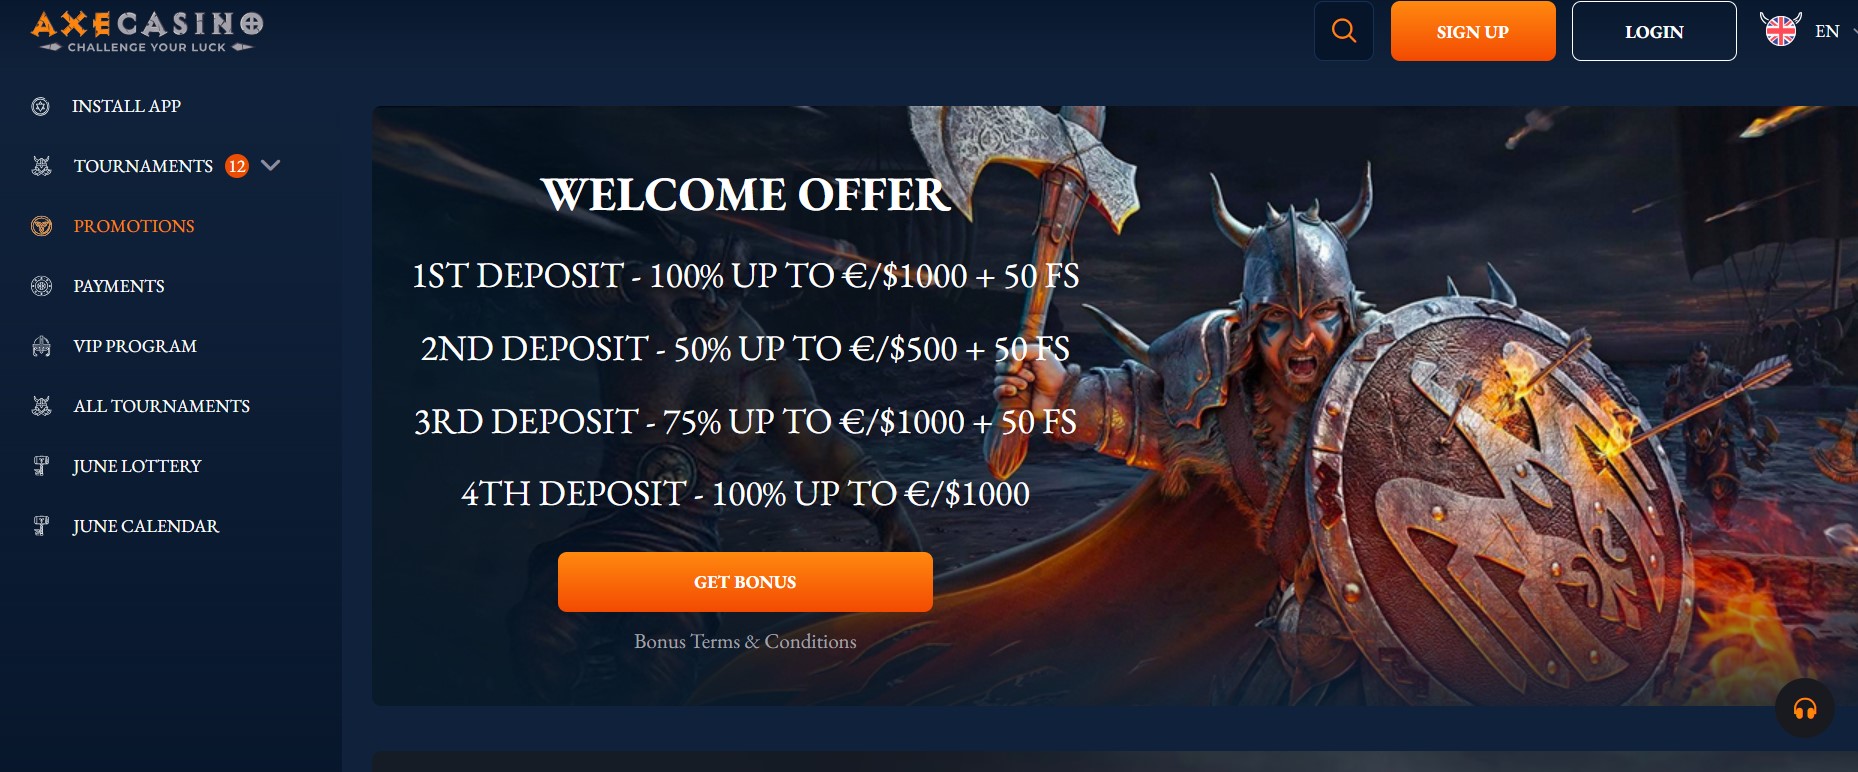 Axe Casino Welcome Offer